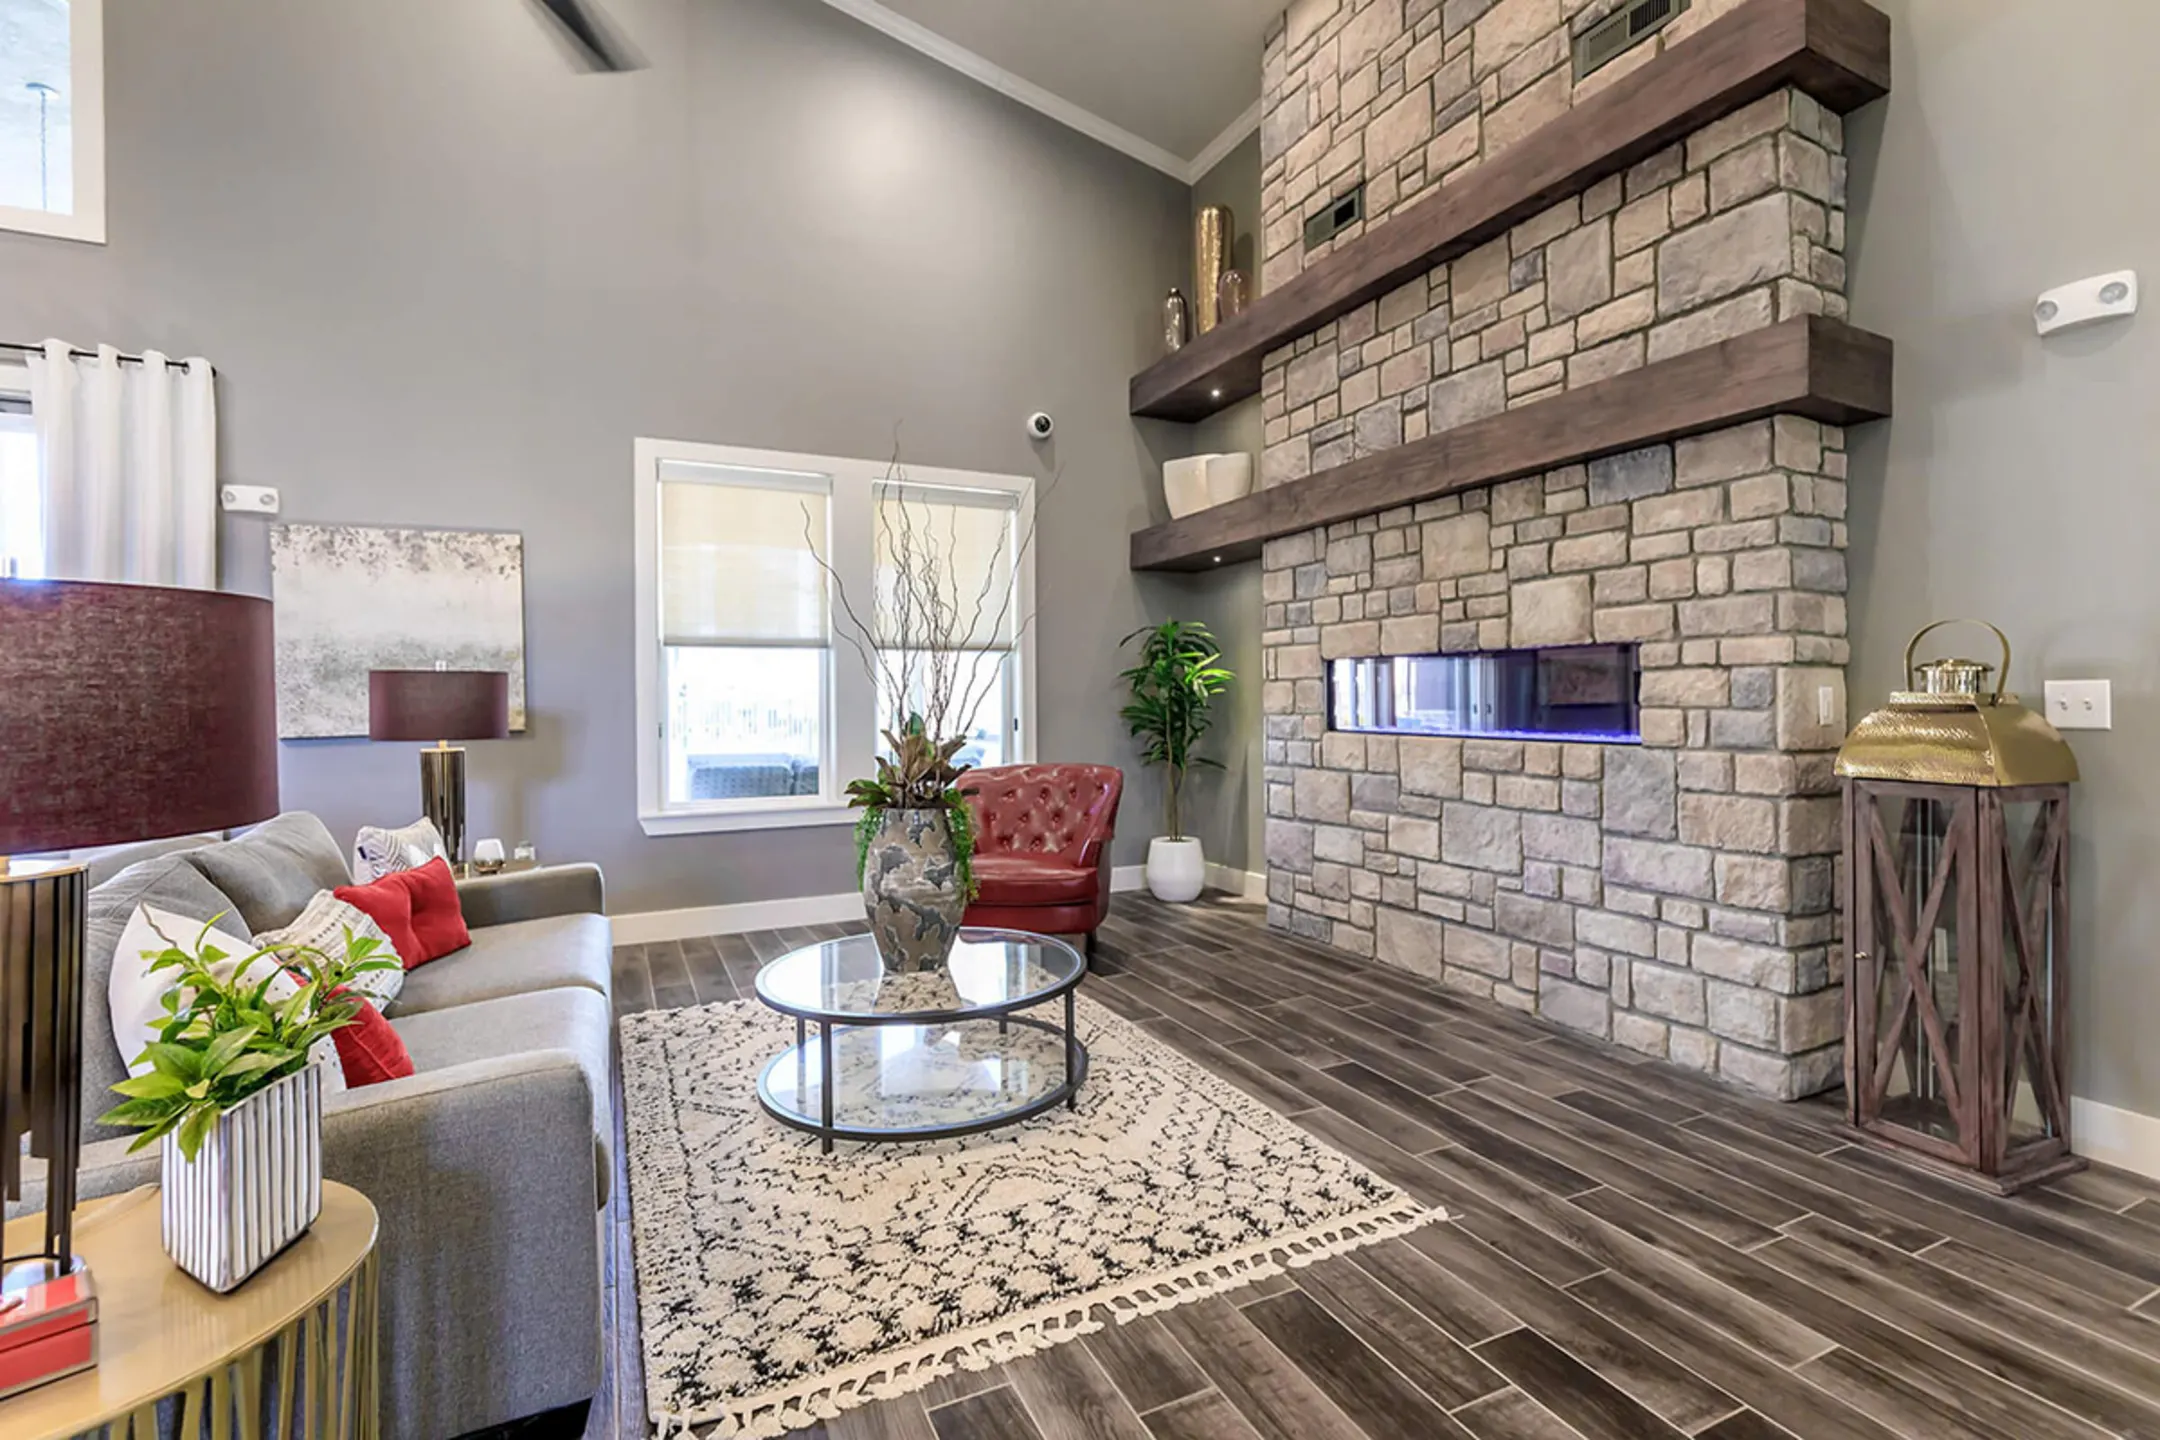 Living Room - Pointe at Greenville Apartments - Greenville, SC